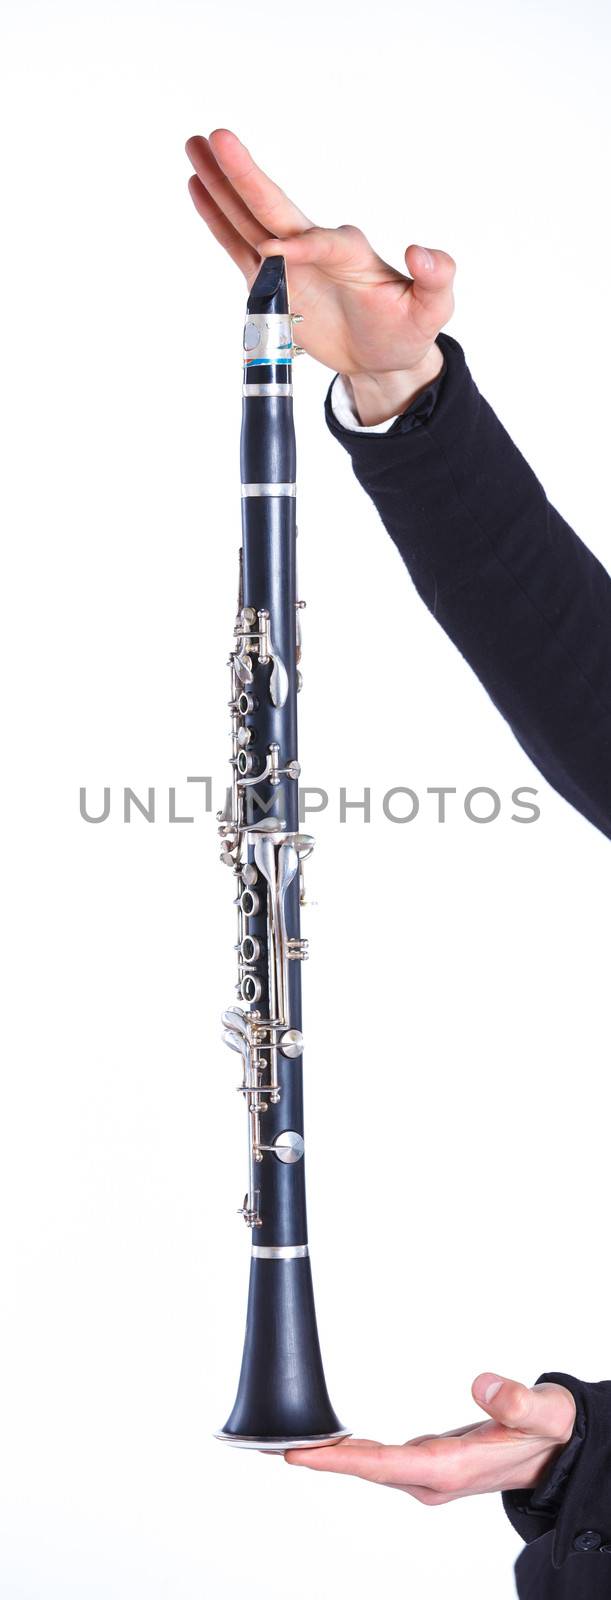 Clarinet in hands young man. Isolated on background.